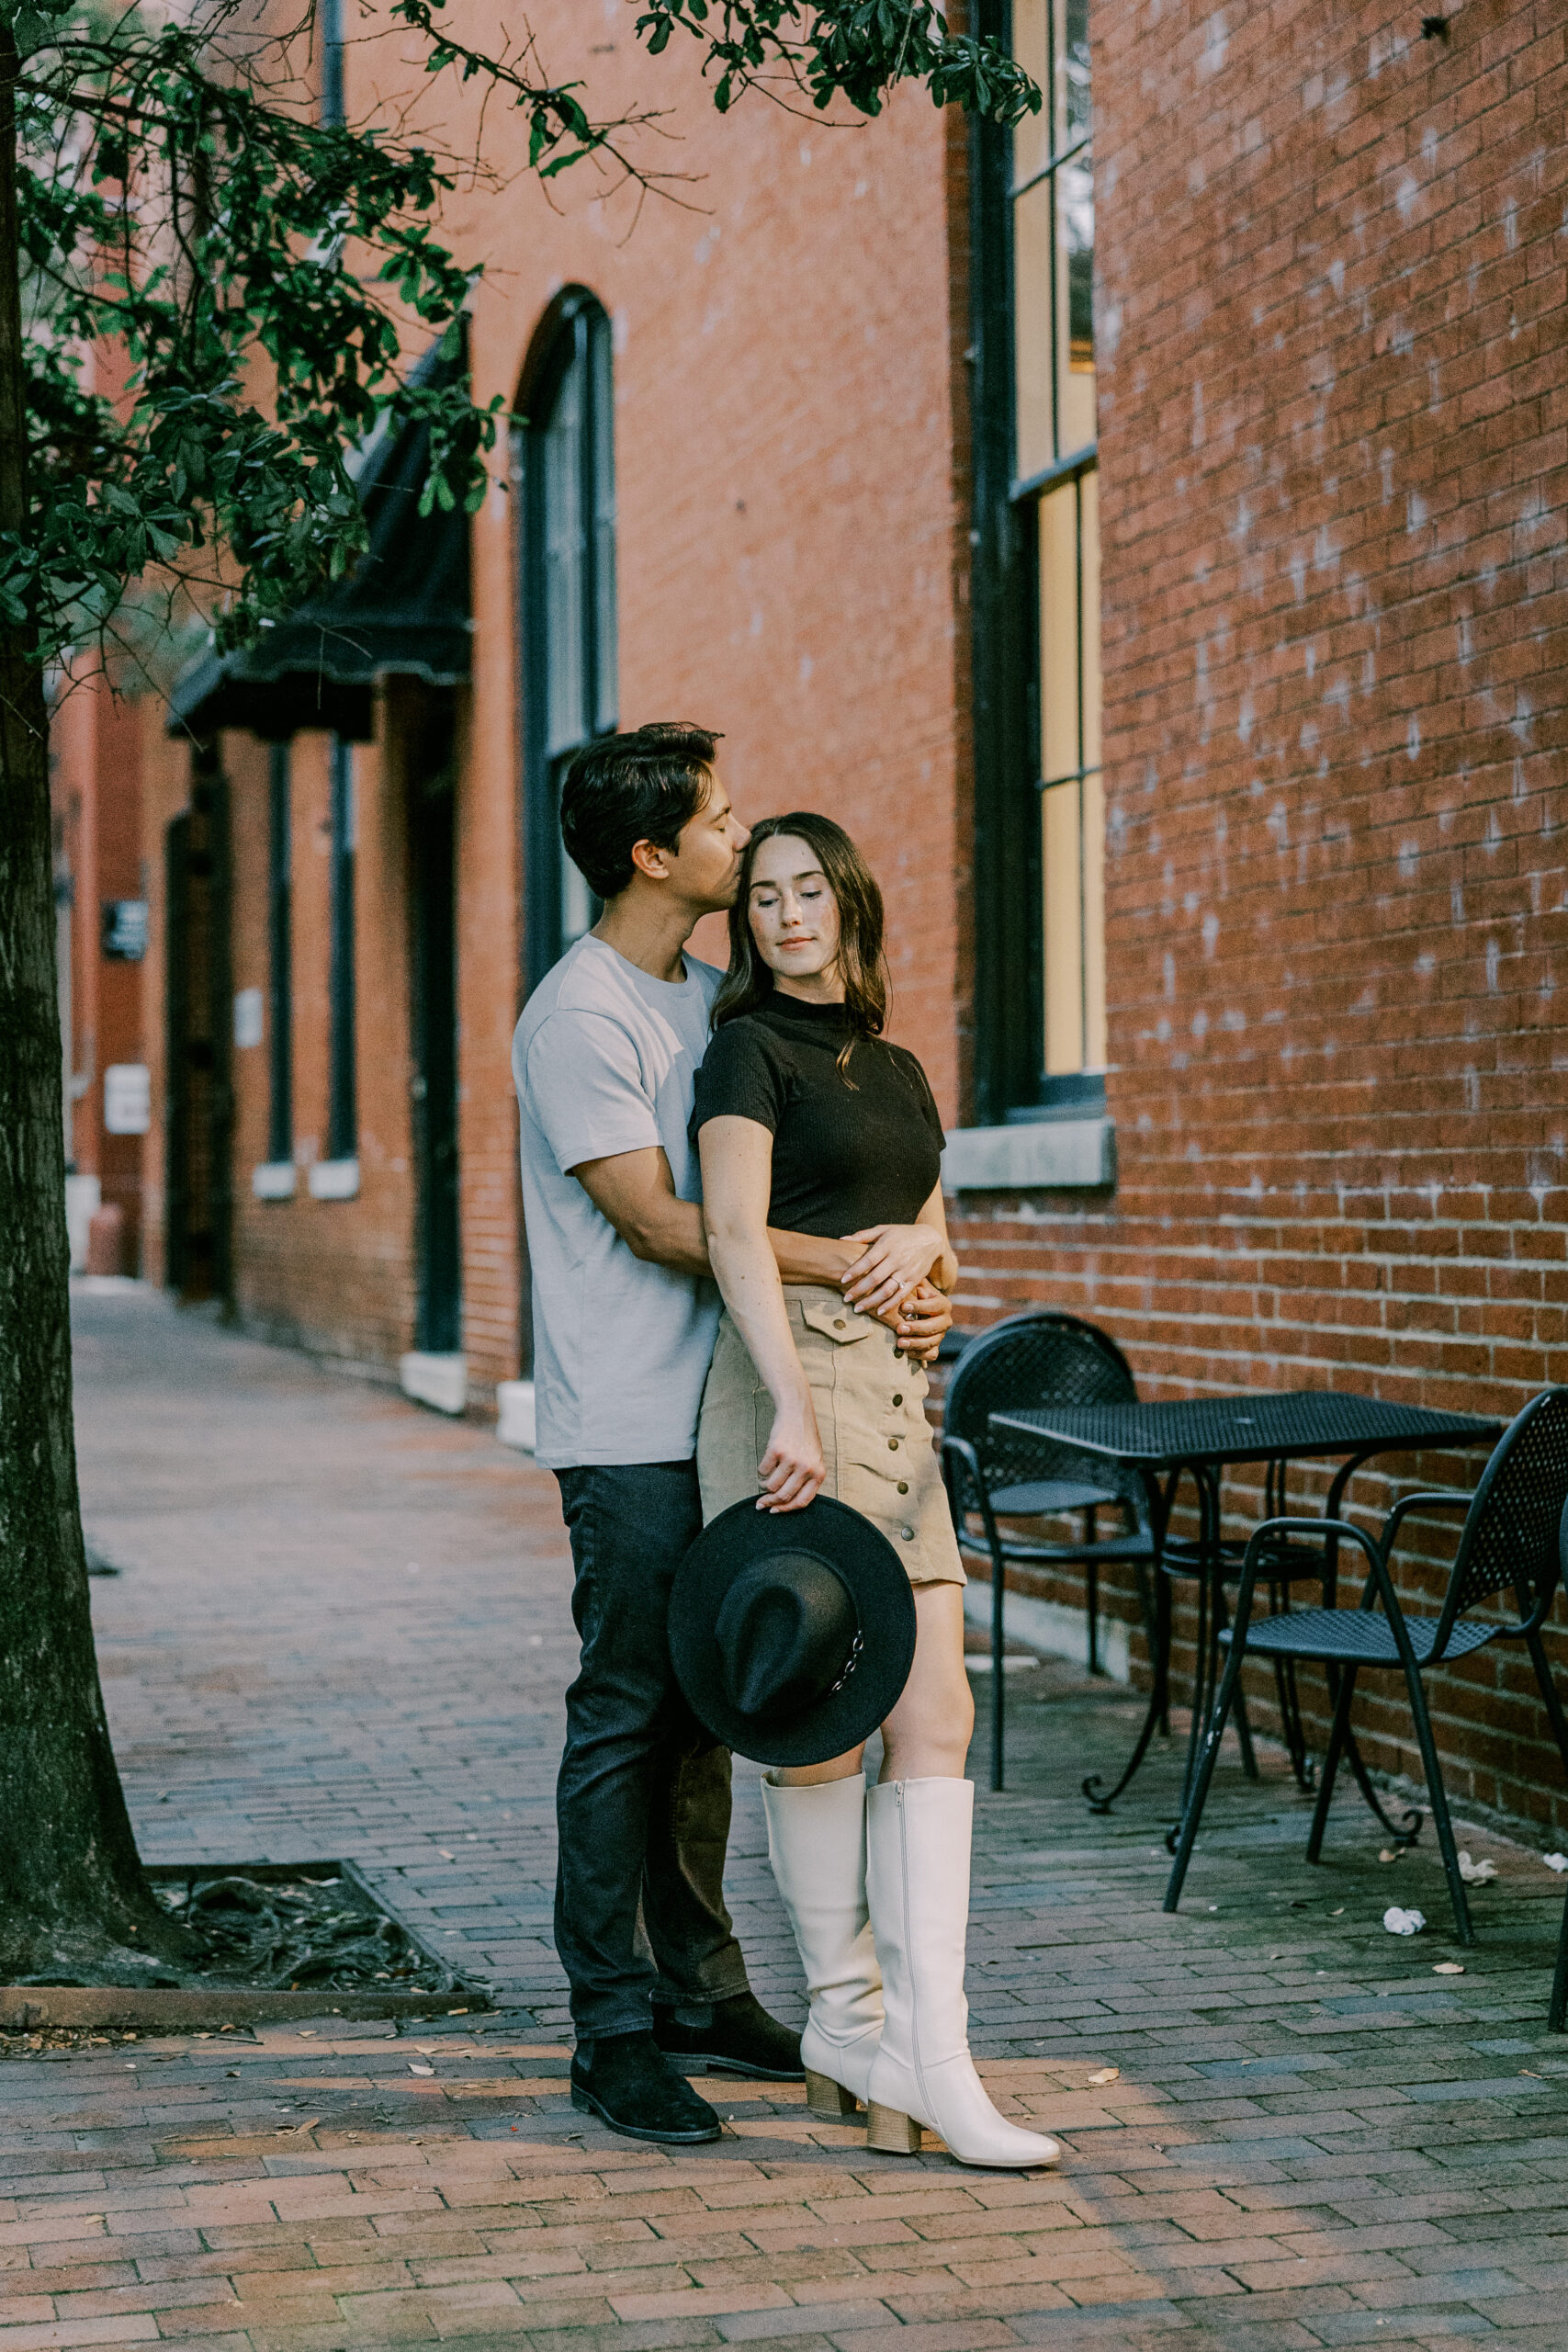 Man hugging woman from behind as woman's eyes are closed on a brick walkway